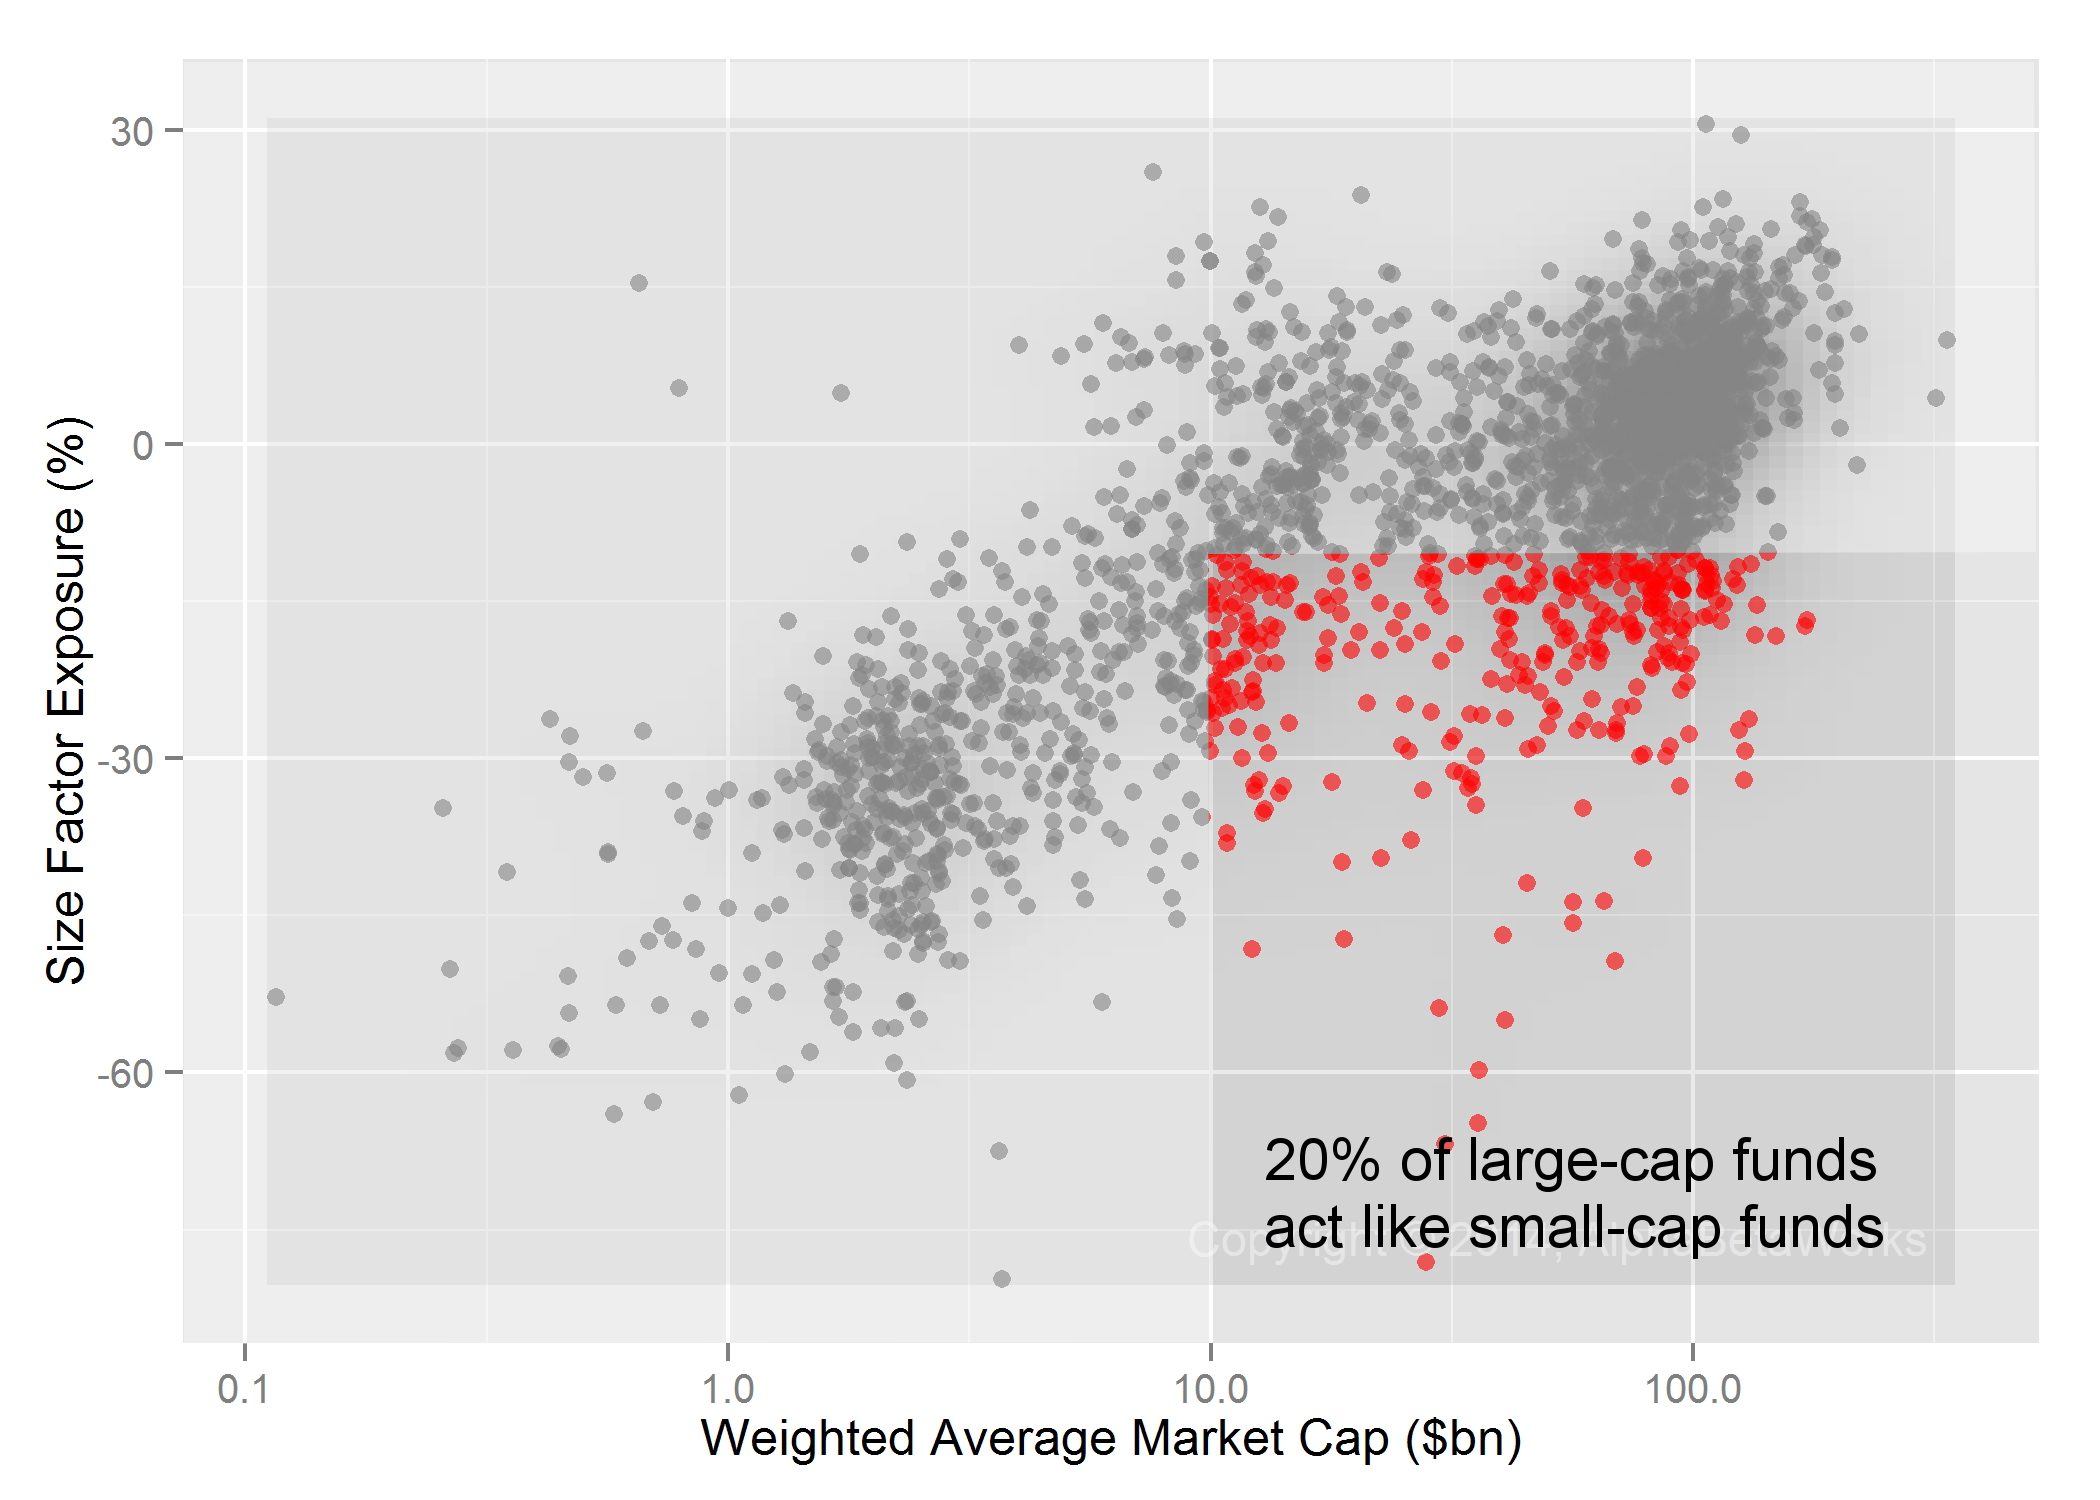 Chart of the Weighted Average Market Cap and Size Risk for U.S. Mutual Funds